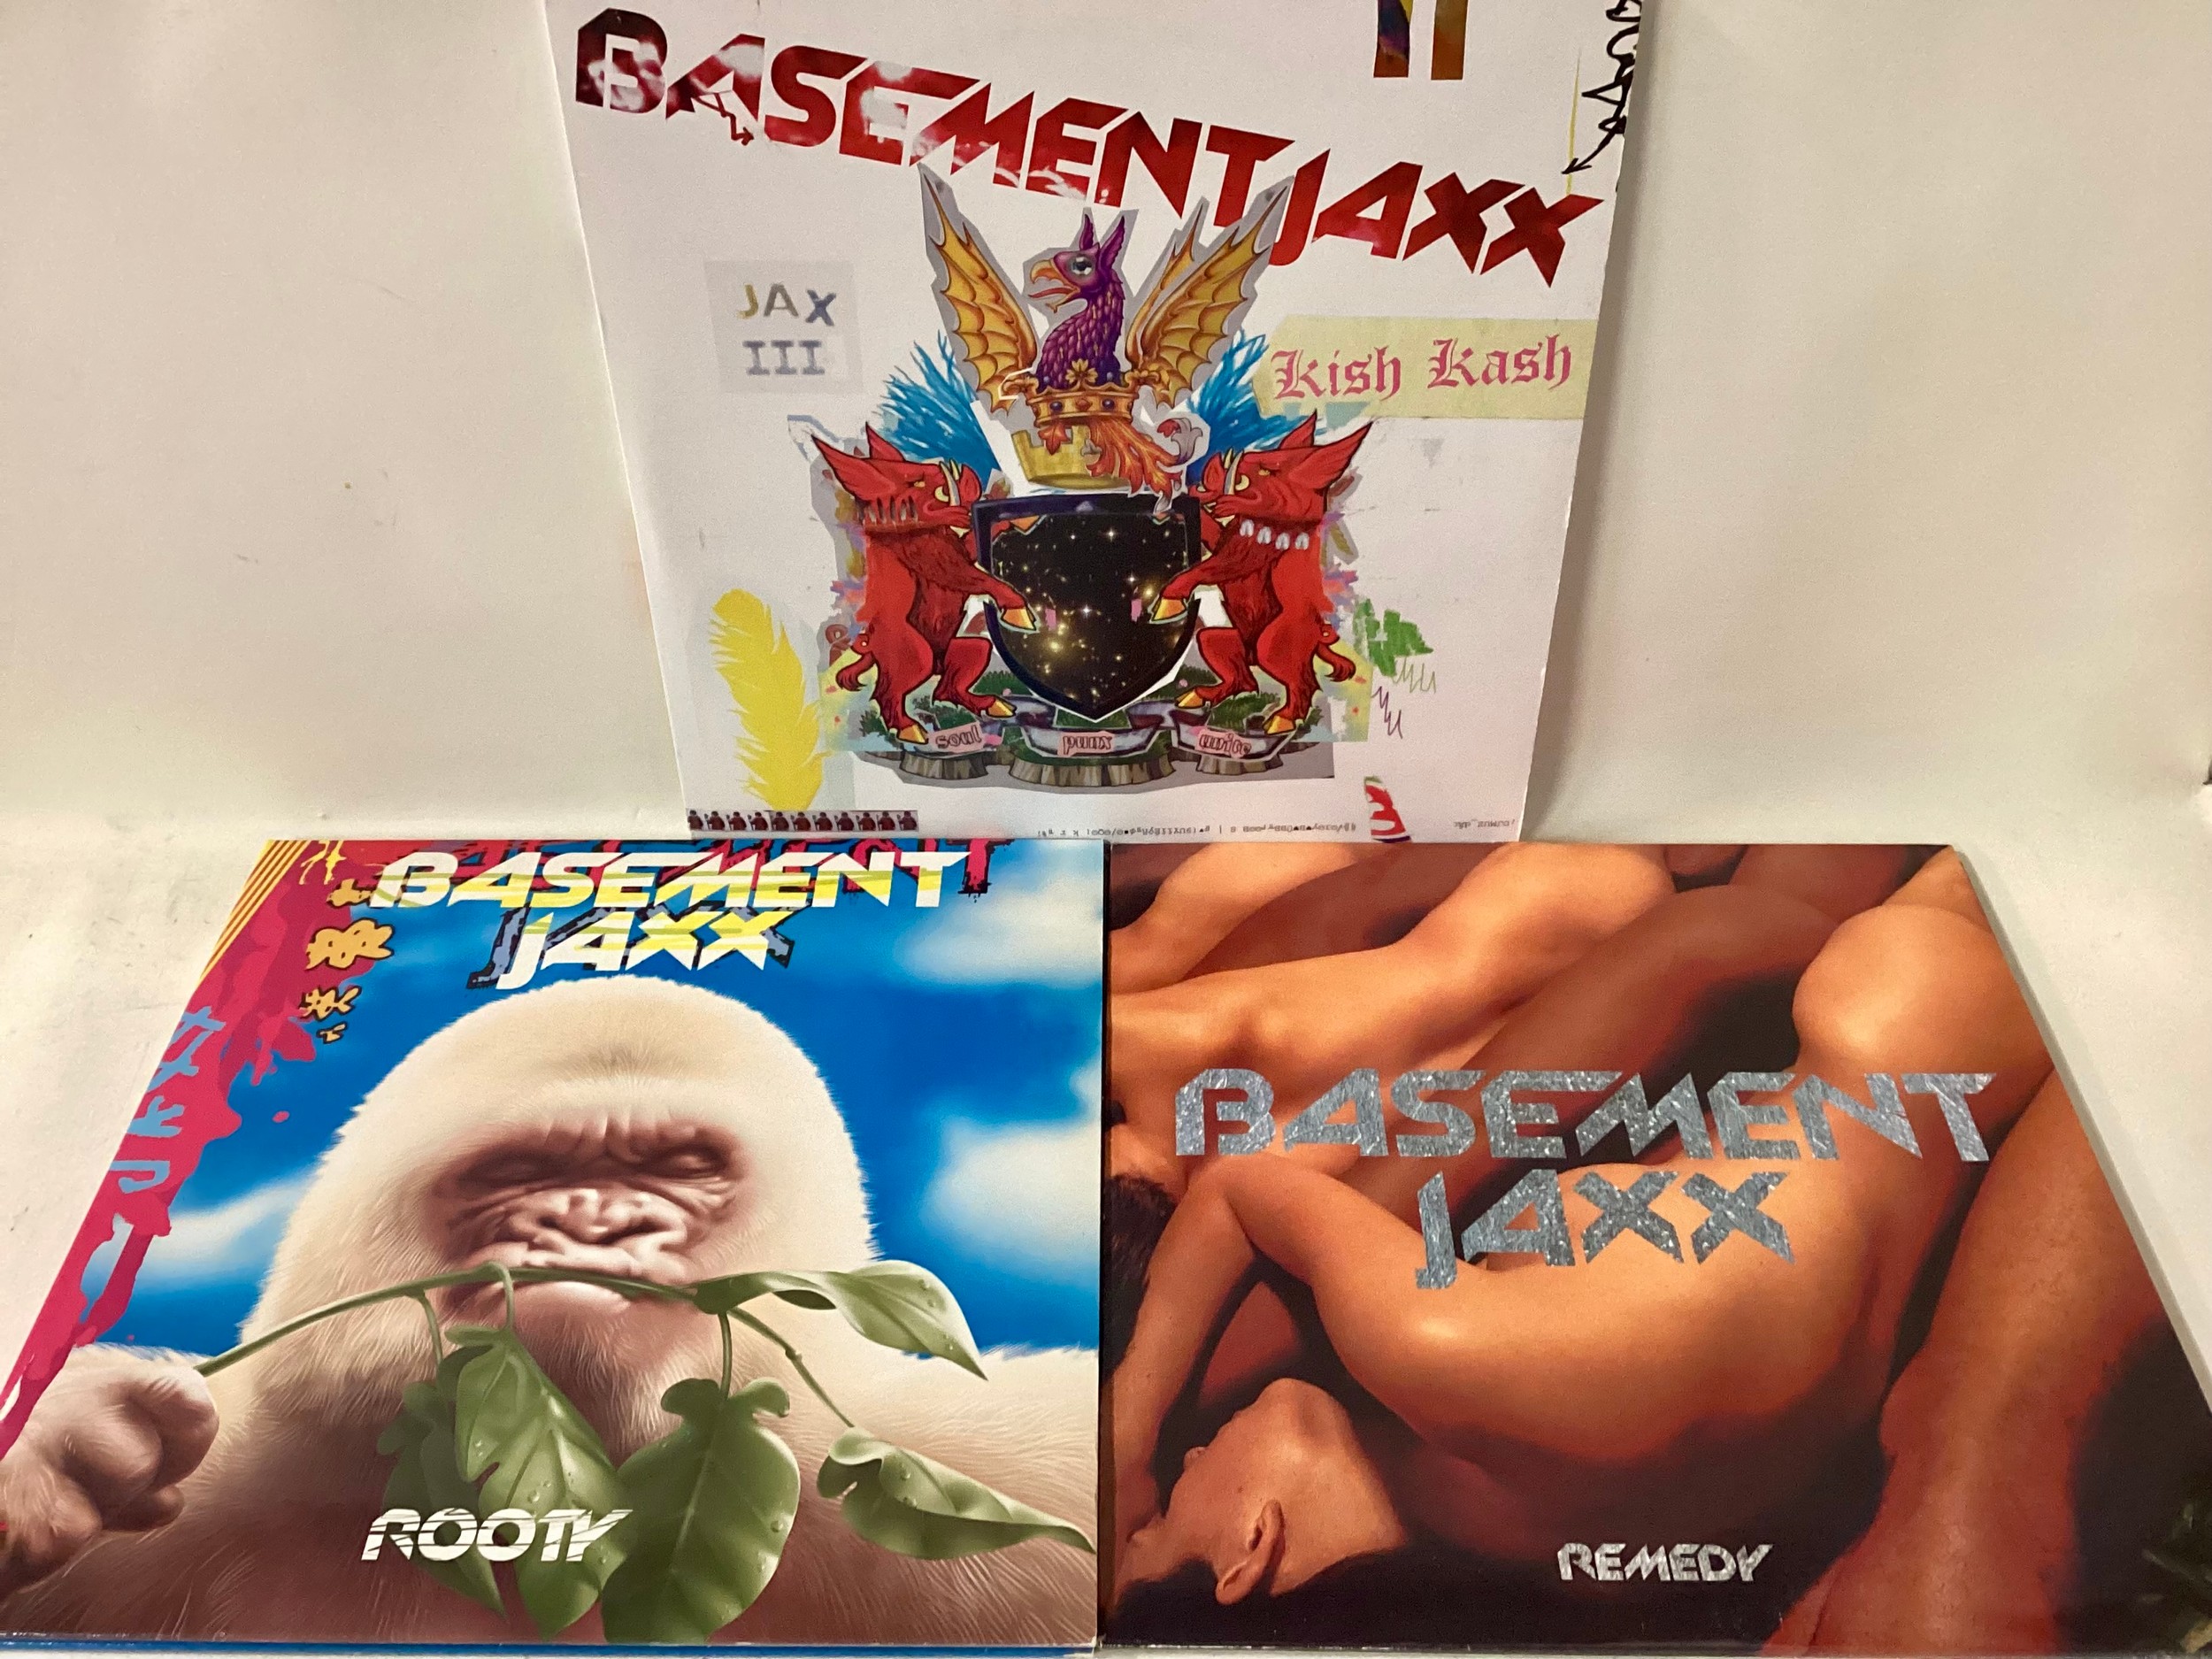 BASEMENT JAXX VINYL ALBUMS X 3. Nice selection with titles - Rooty - Remedy - Kish Kash. All found